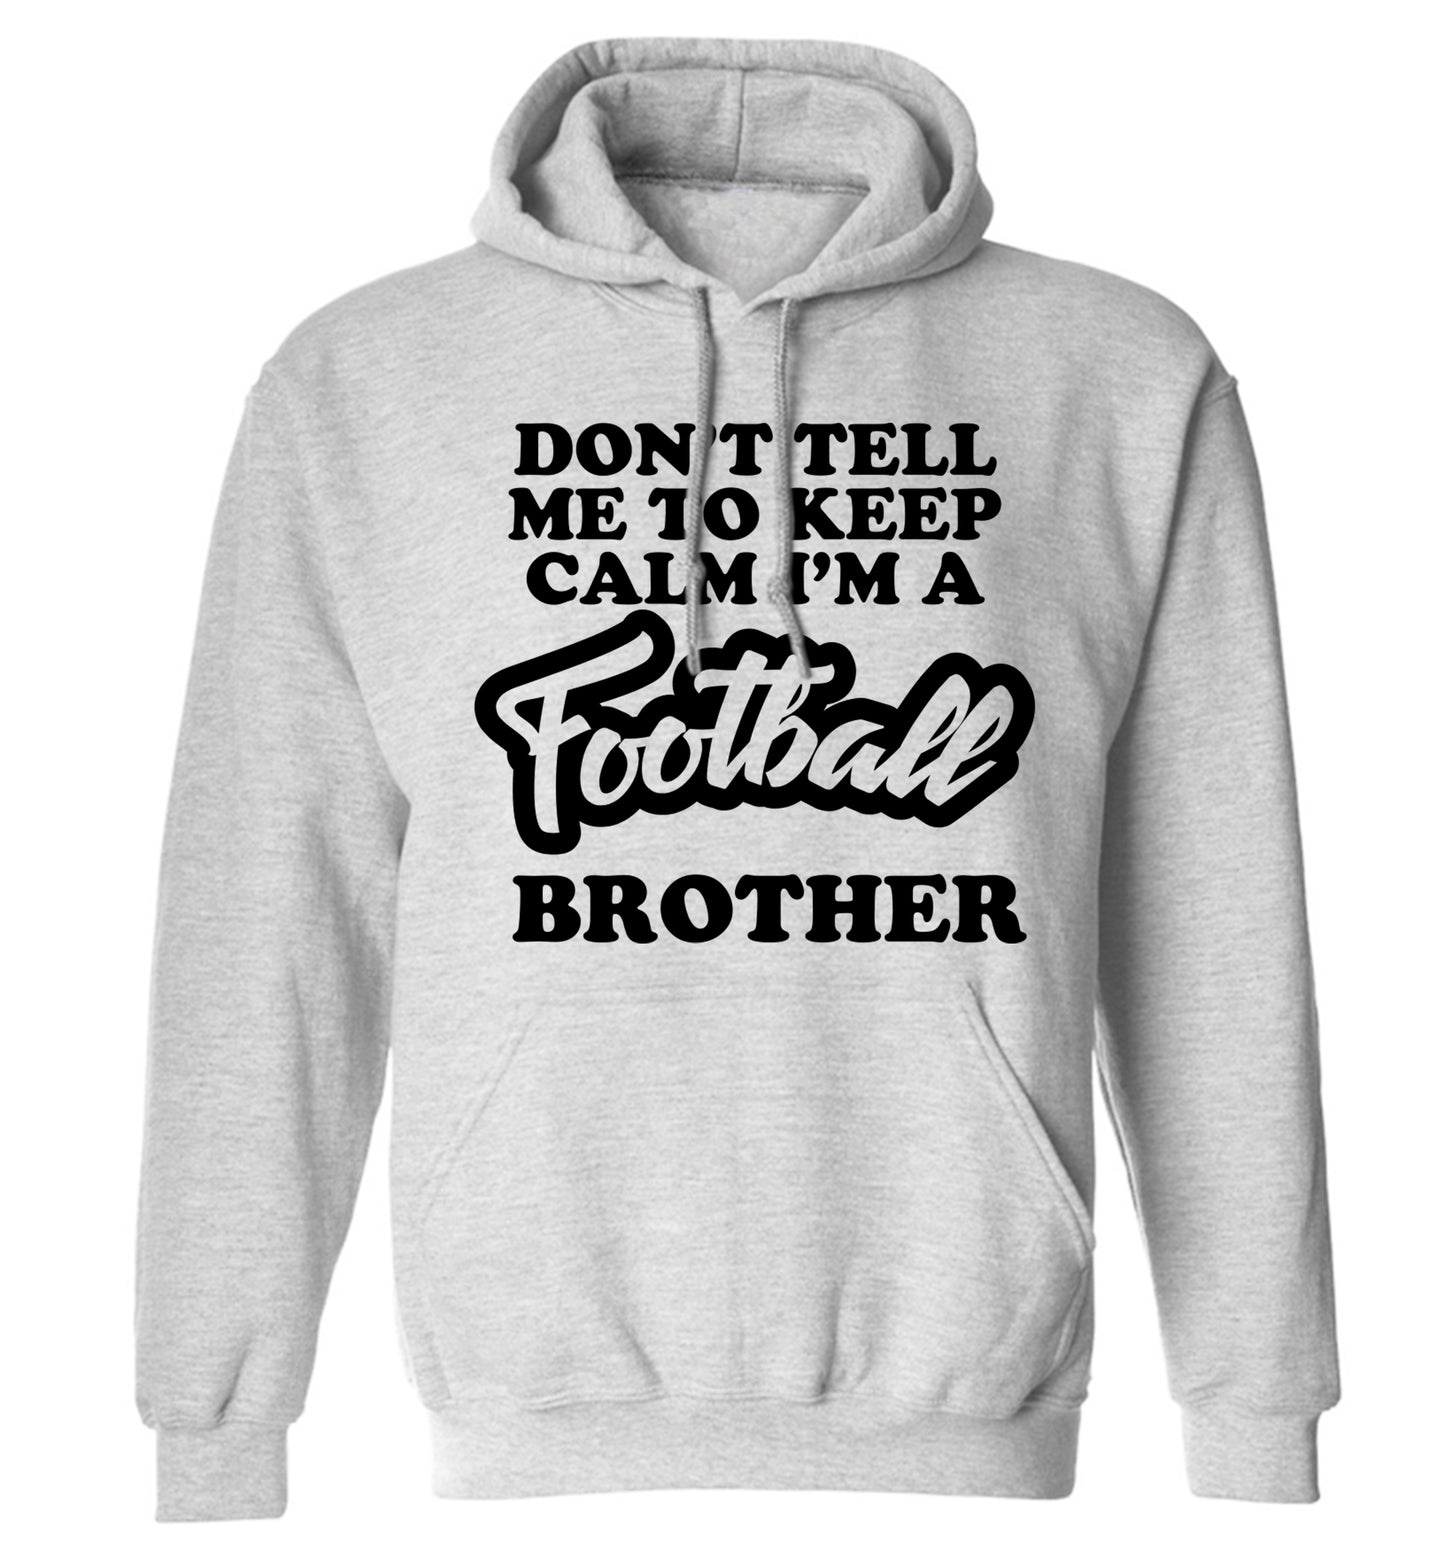 Don't tell me to keep calm I'm a football brother adults unisexgrey hoodie 2XL